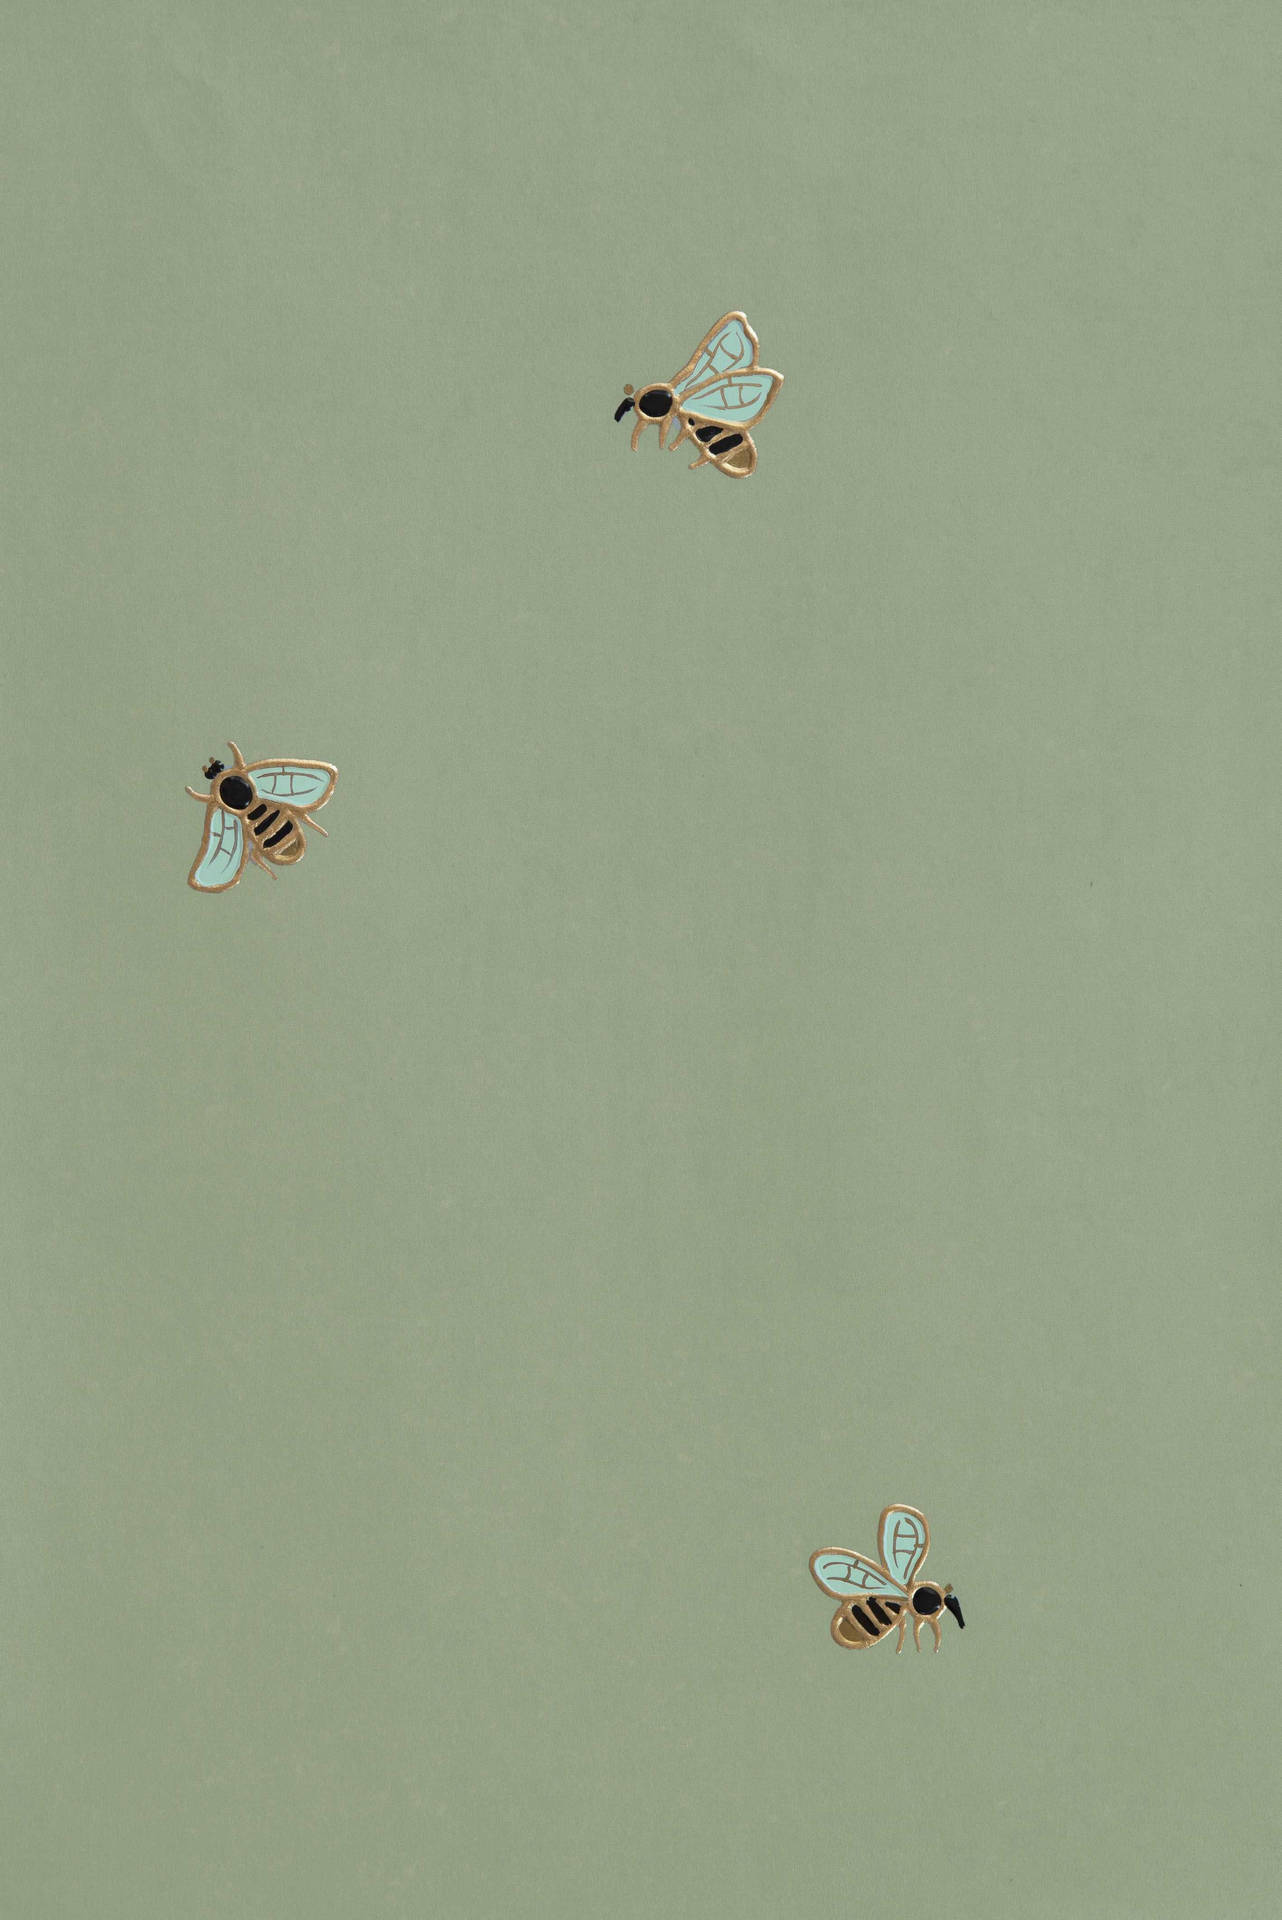 Sage Green Wall And Bees Background